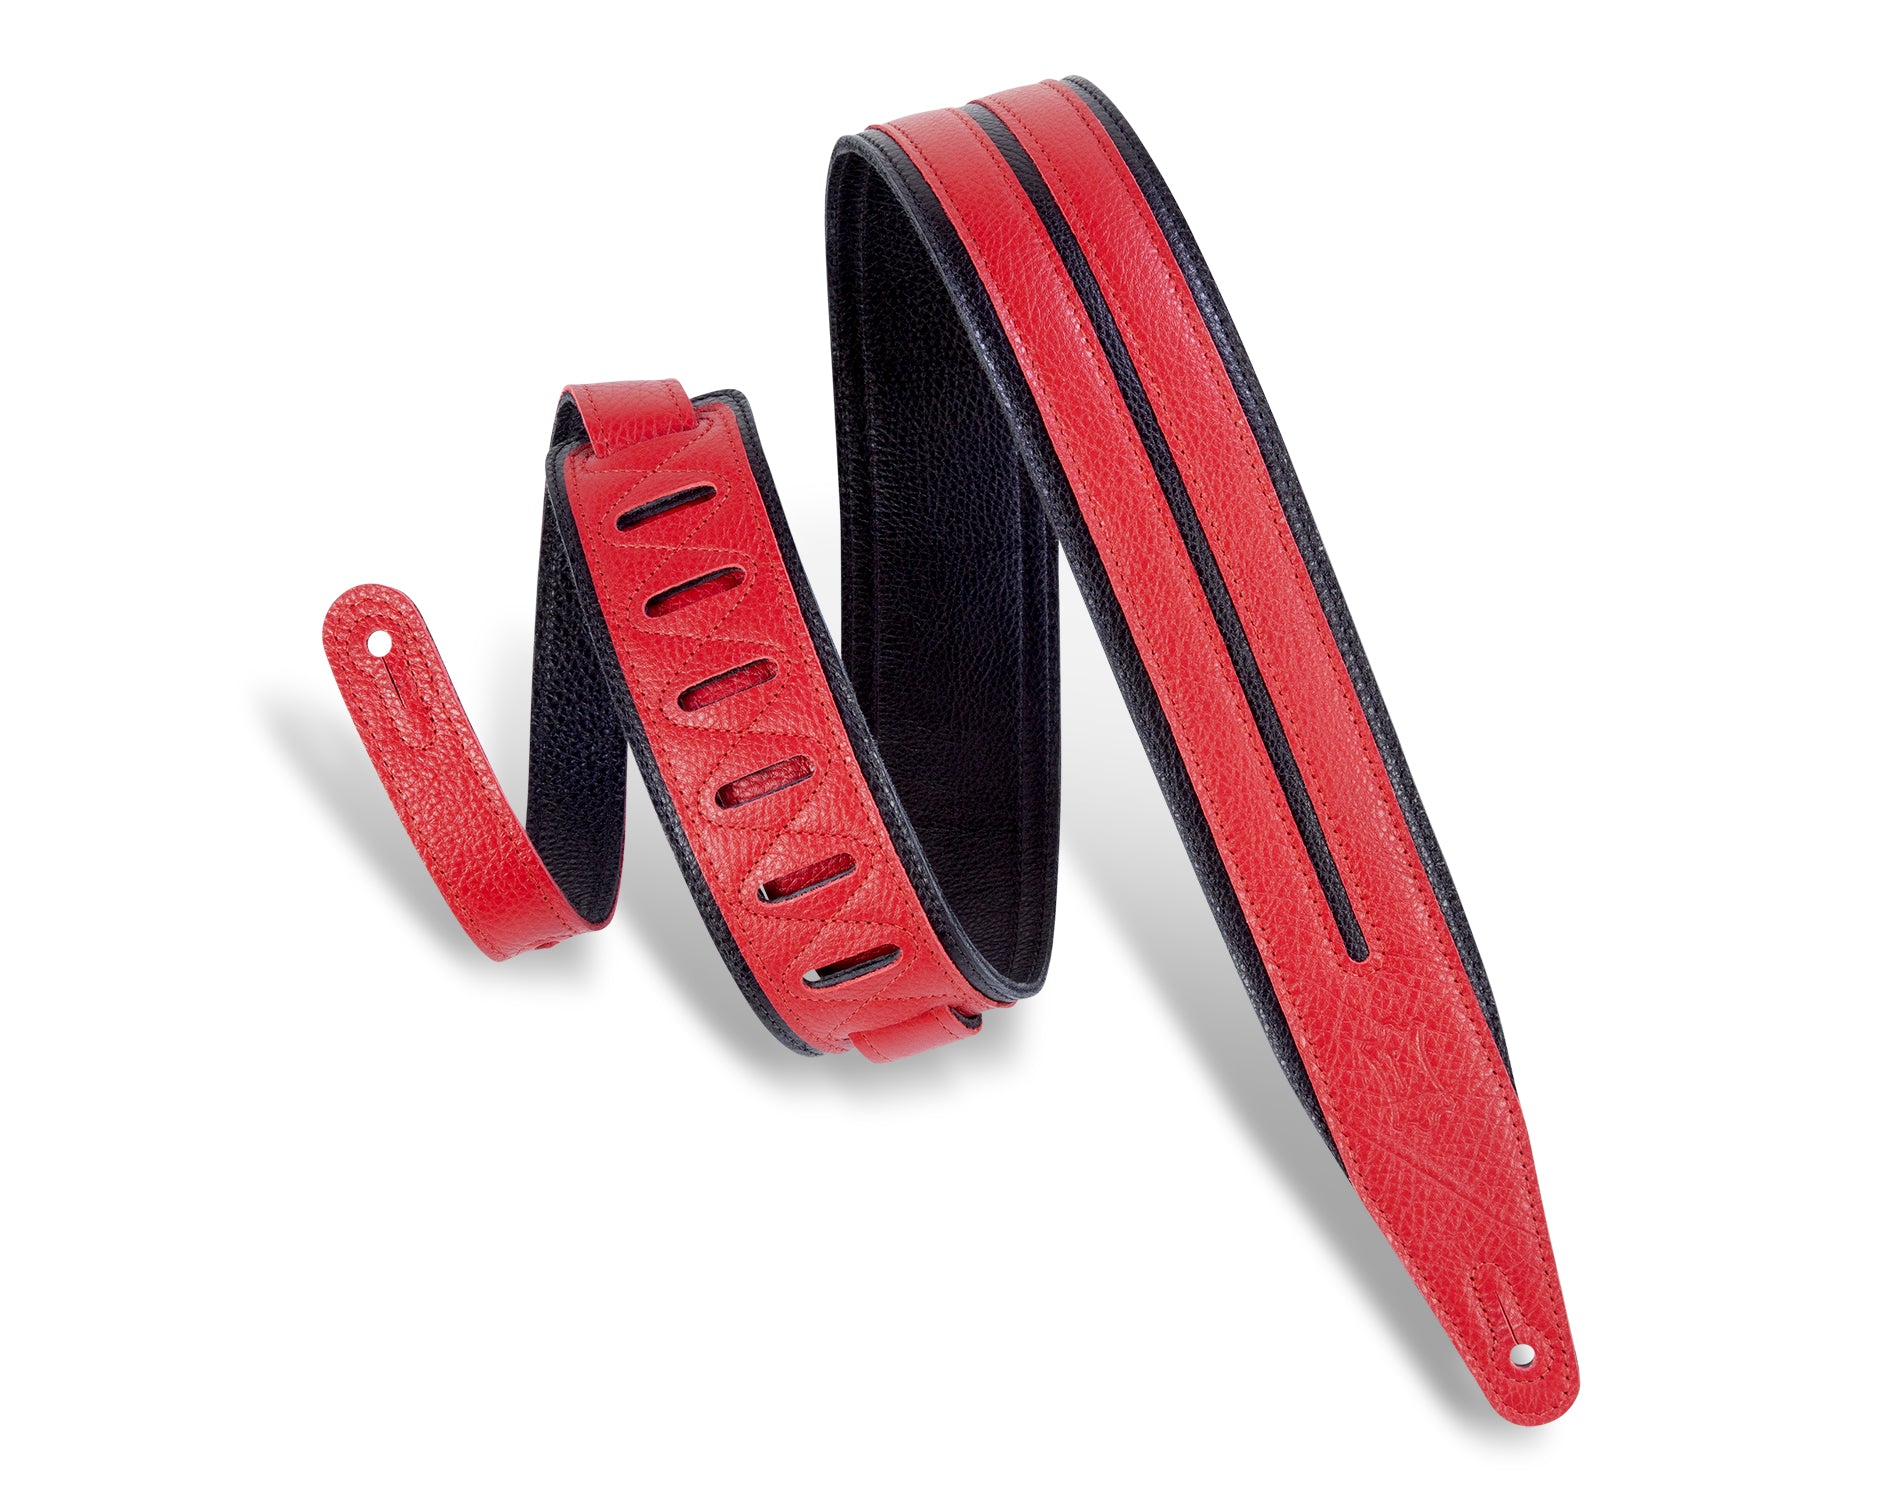 LEVY'S MG317DRS-BLK_RED 2.5” GARMENT LEATHER DOUBLE RACING STRIPE GUITAR STRAP- BLACK AND RED